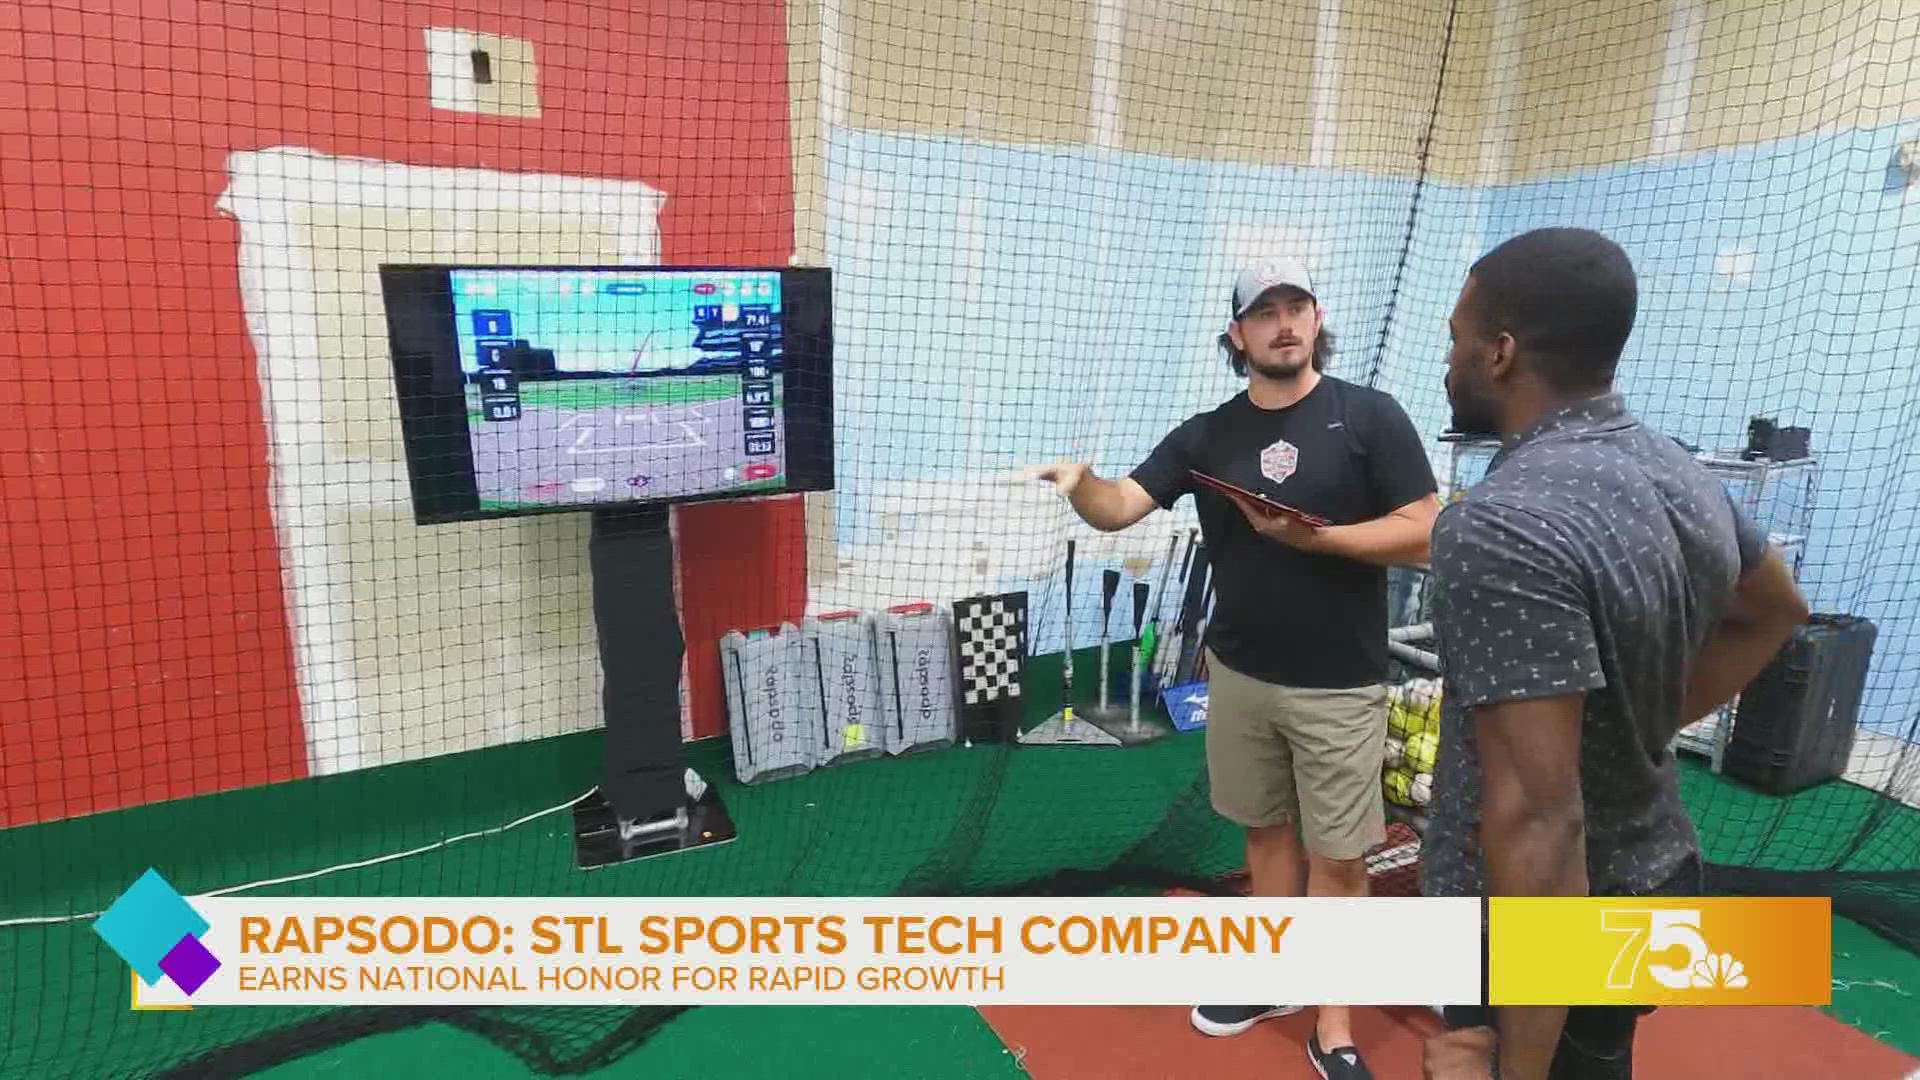 Malik Wilson stopped by the Rapsodo facility to find out how they’re helping athletes improve their game through advanced data and statistics